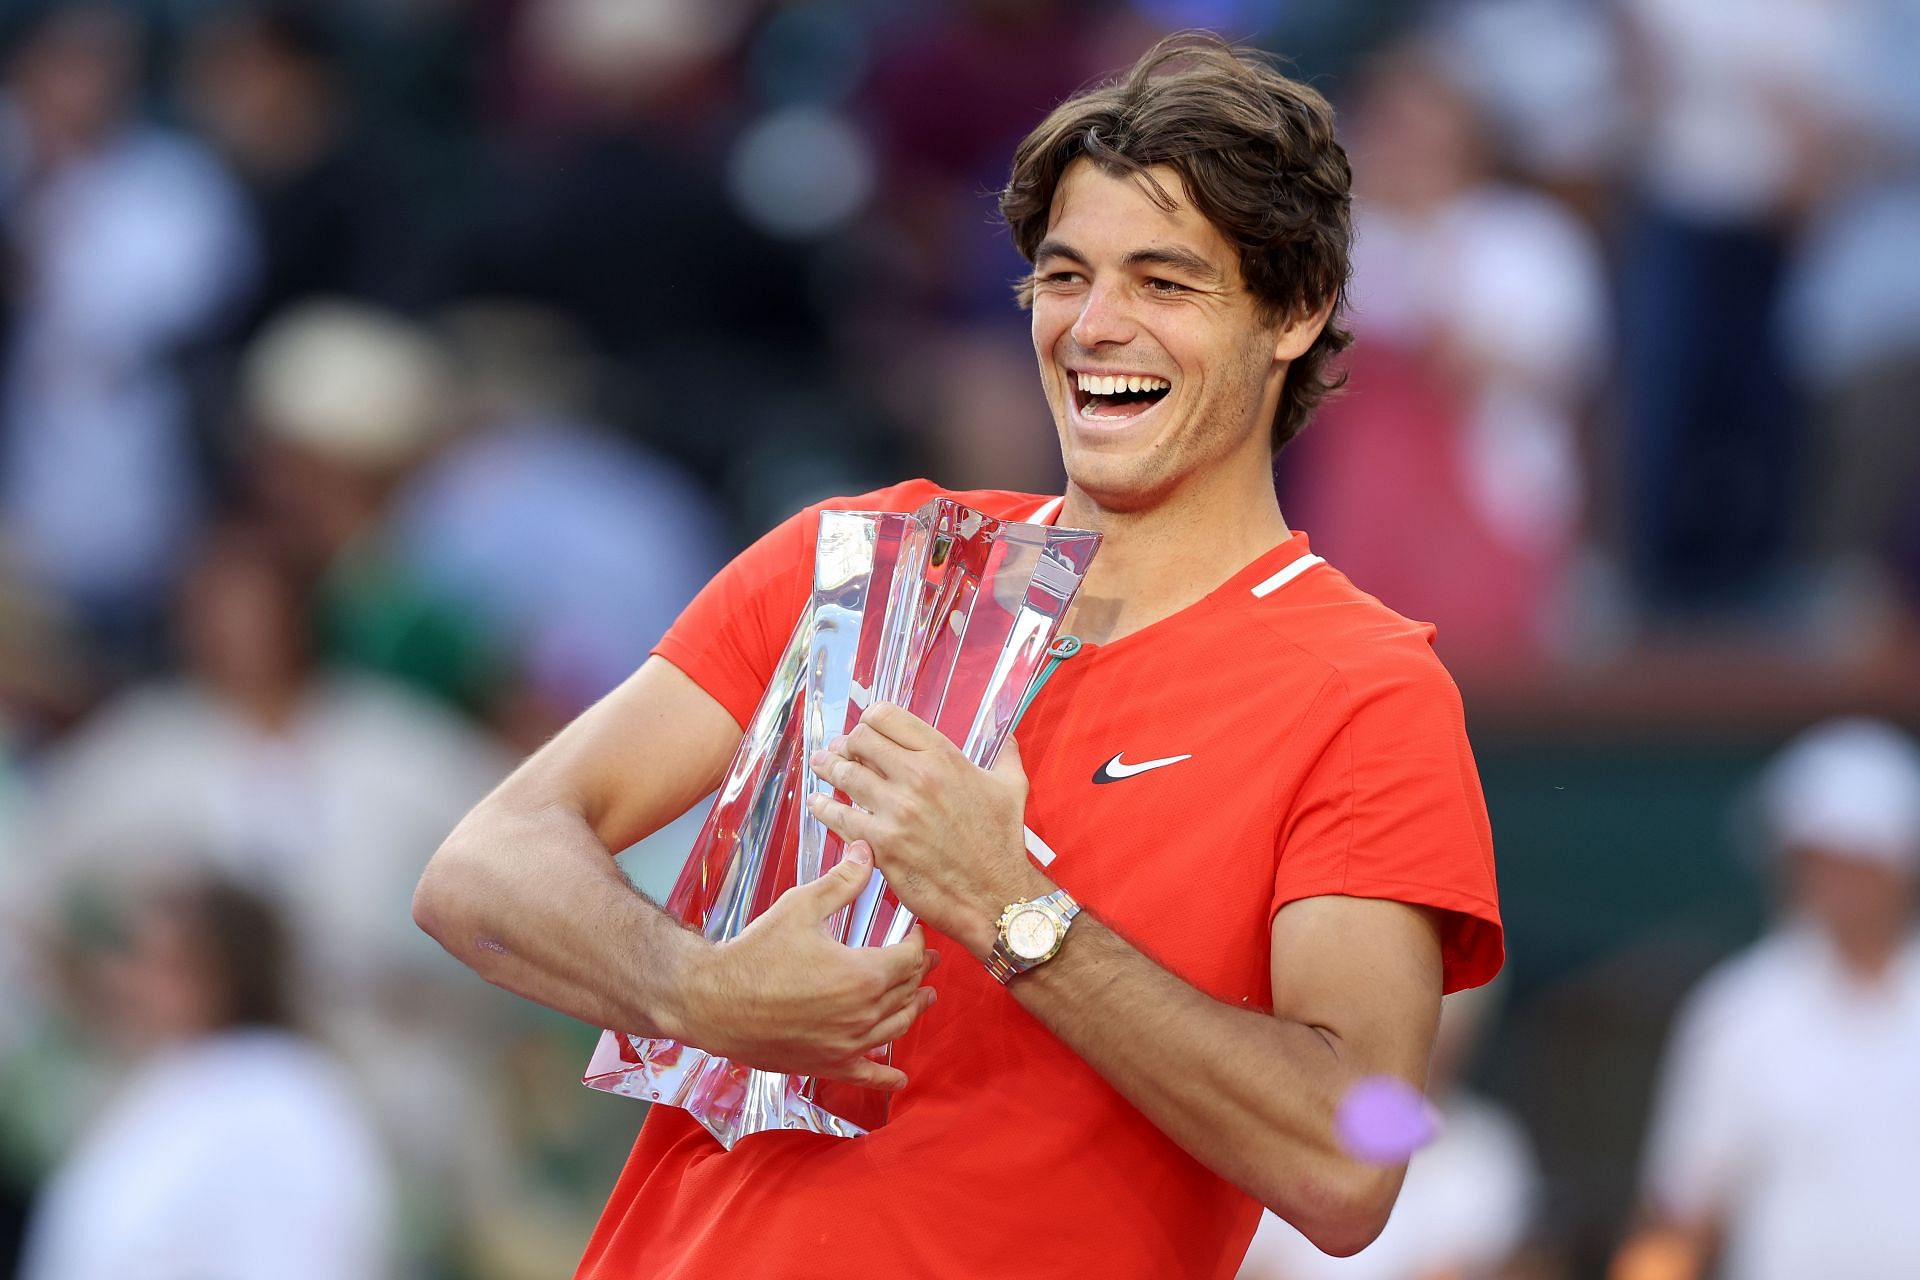 Taylor Fritz won the Indian Wells Masters in 2022